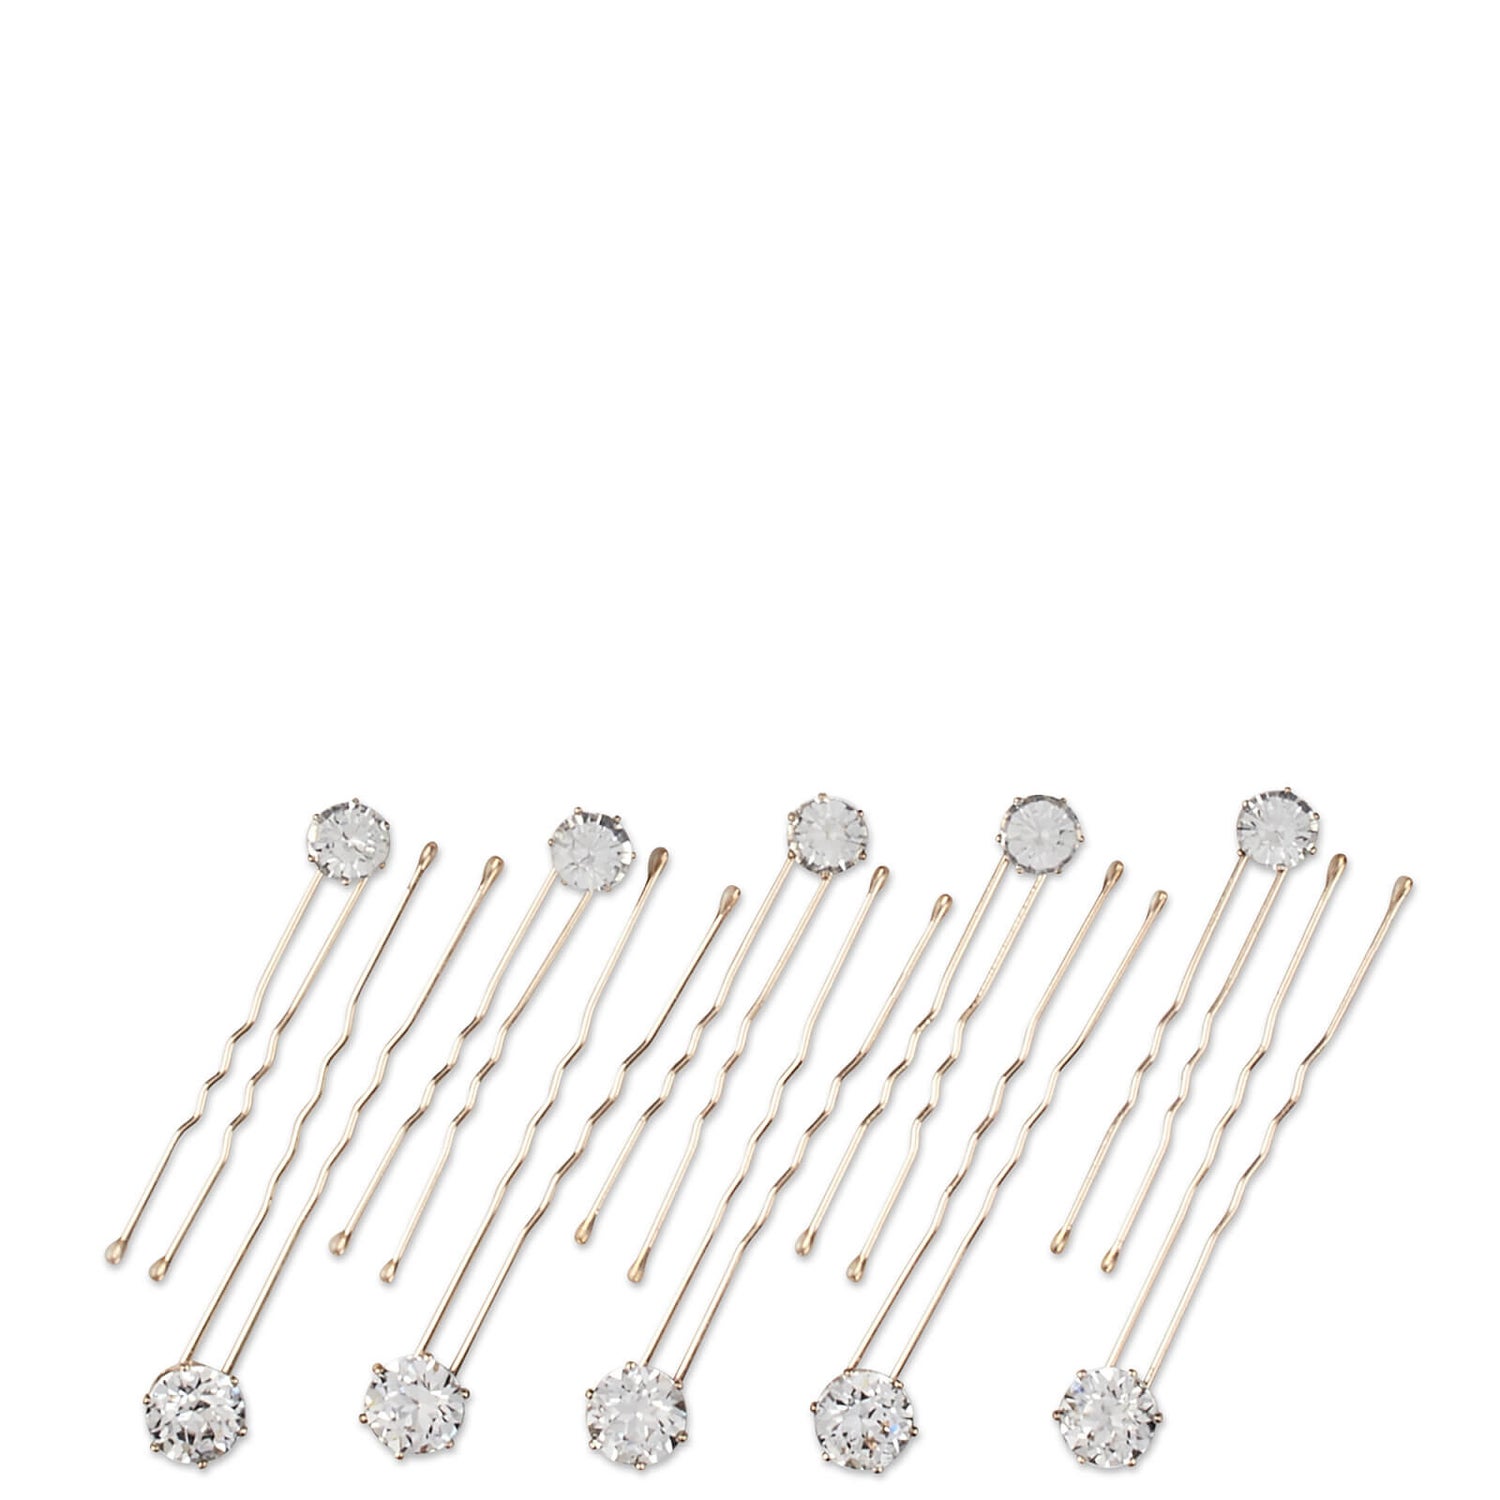 Scunci Basik Edition Mixed Size Stone Head Pins (10 Pack)